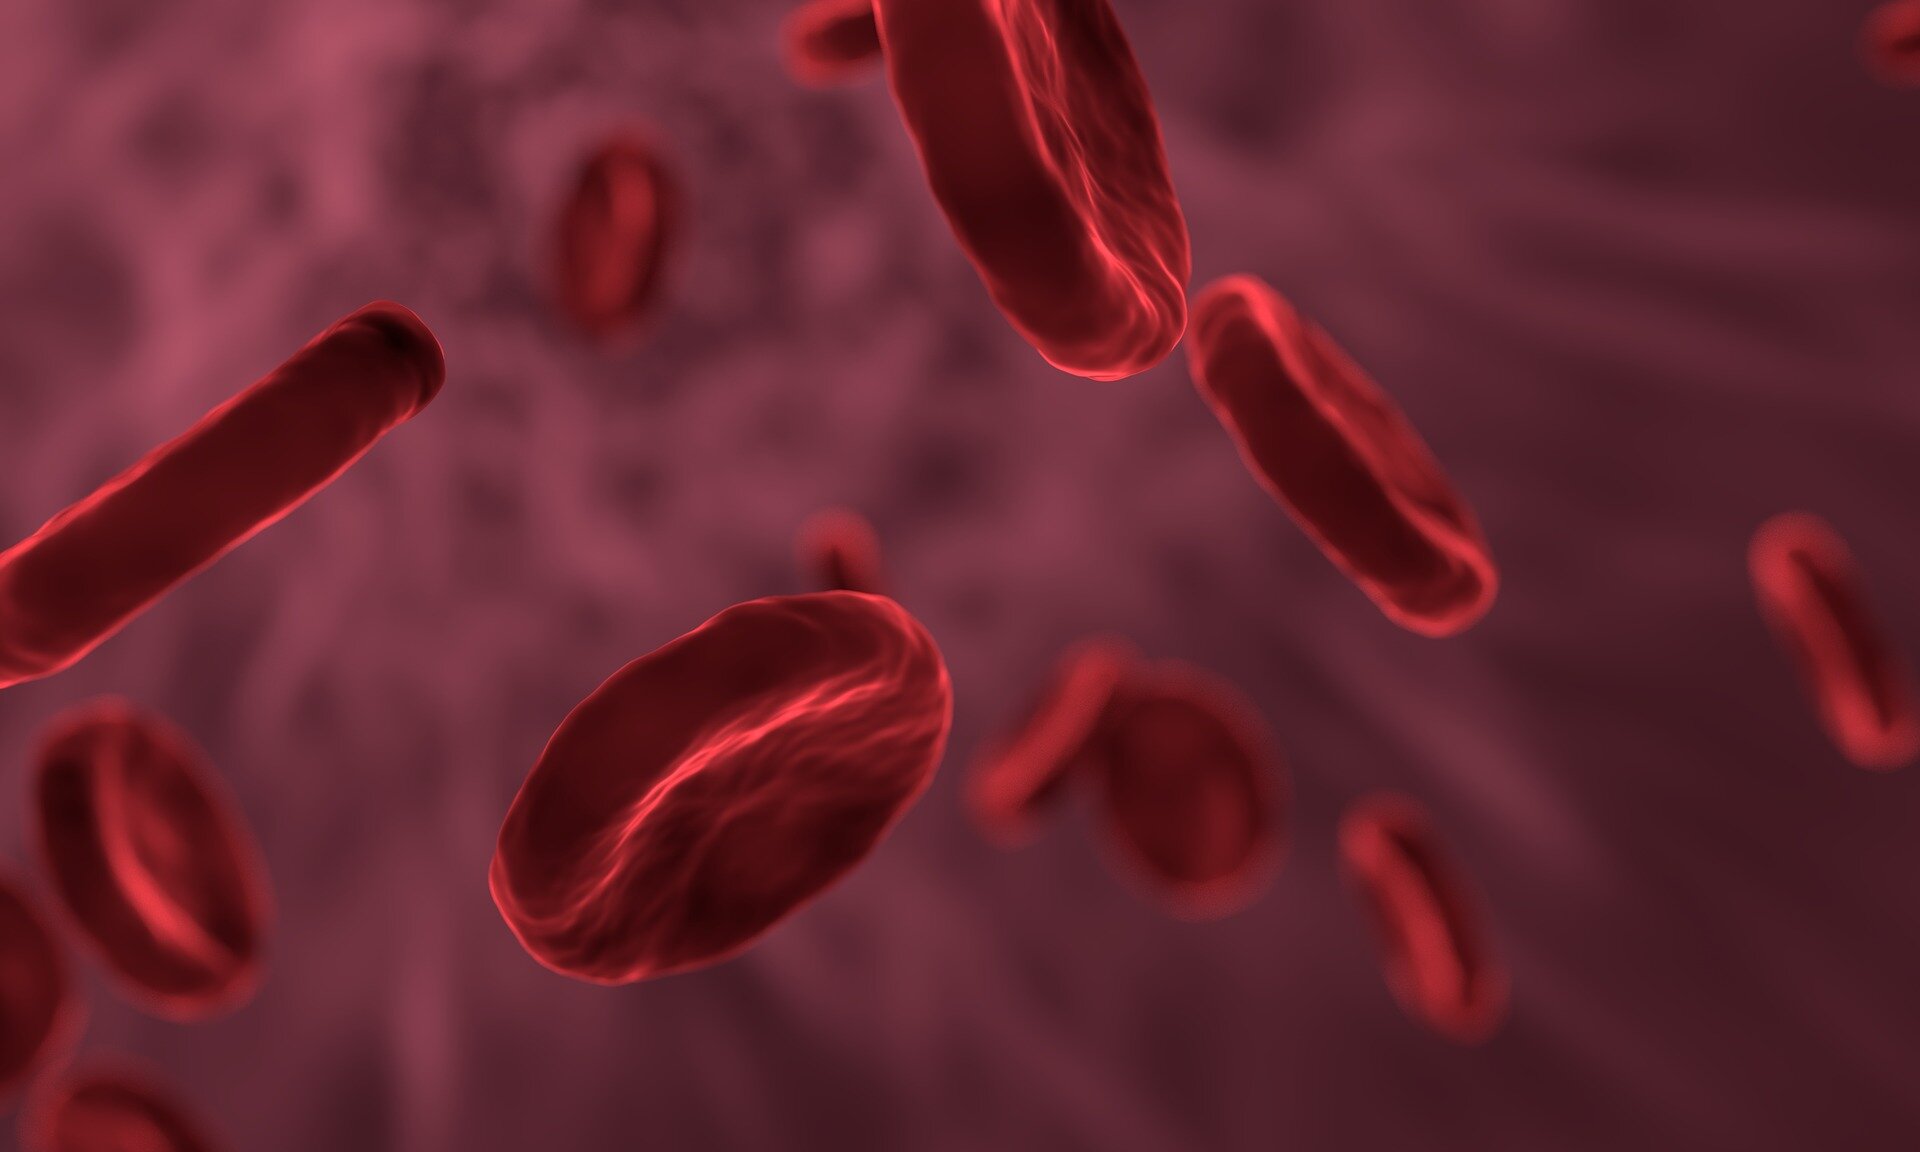 Researchers discover a rare new blood group system